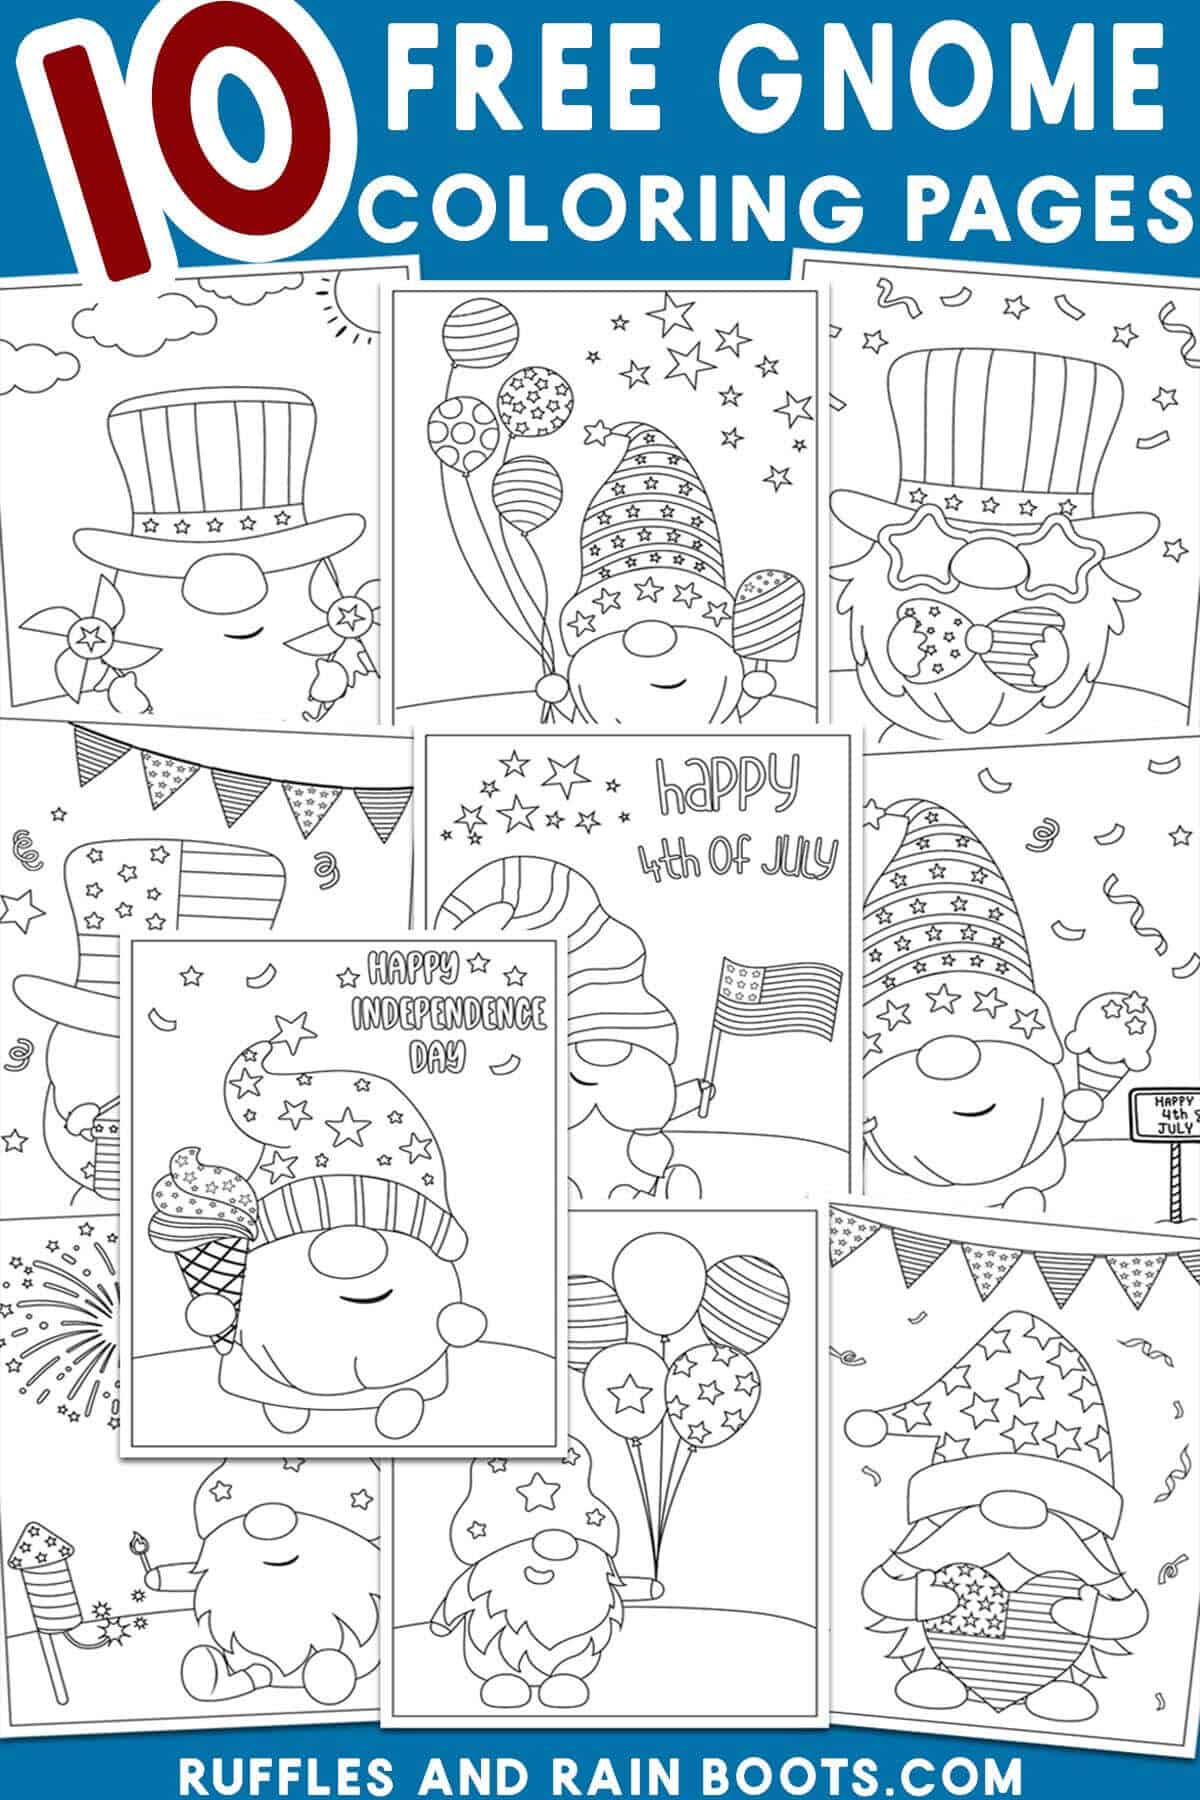 Gnome coloring pages both printable and digital